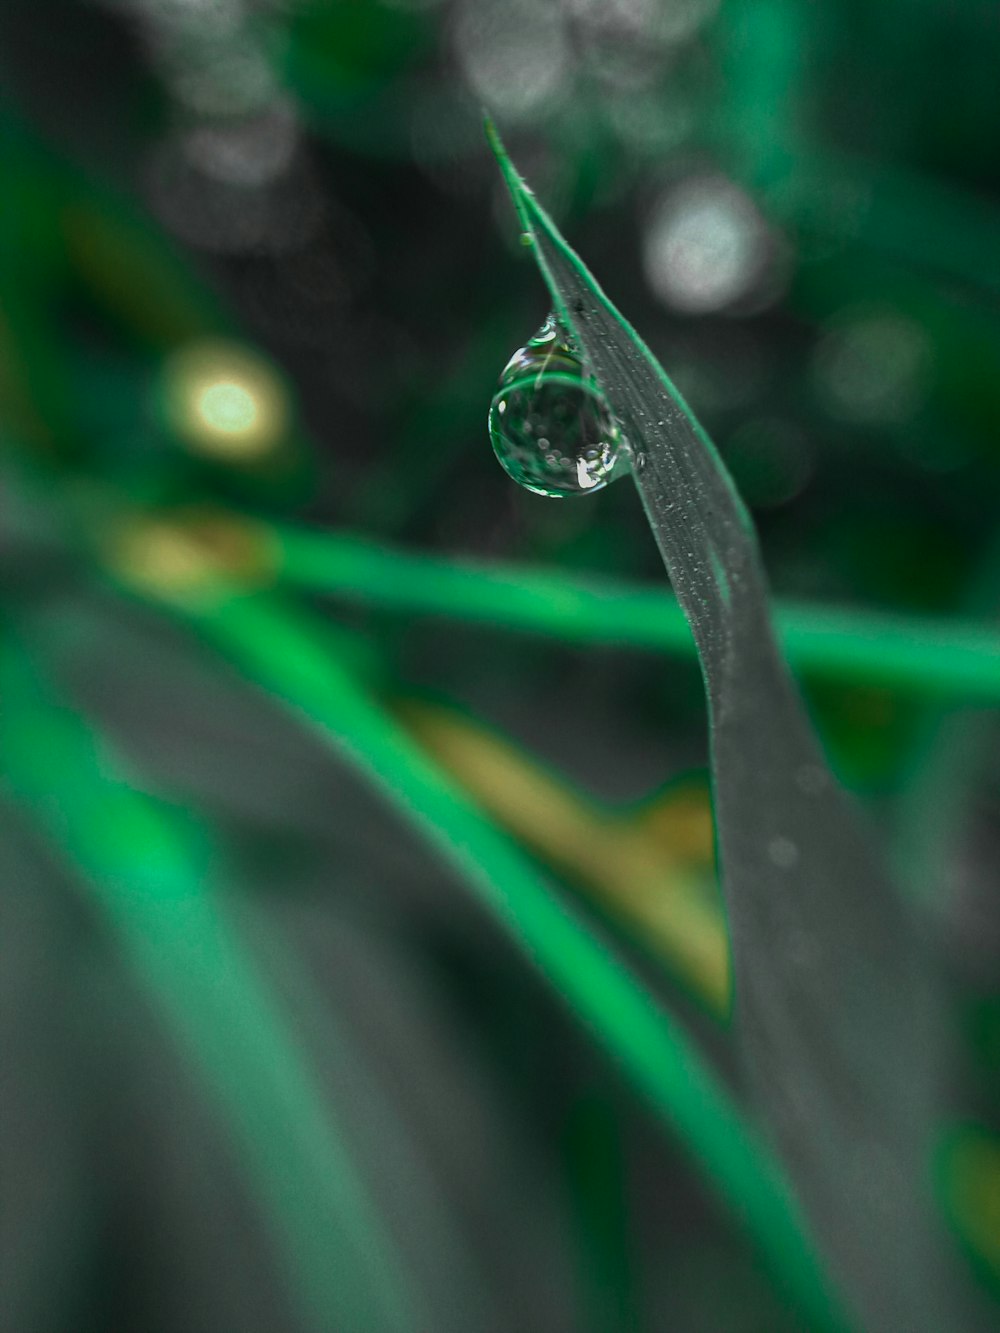 a close up of a drop of water on a leaf